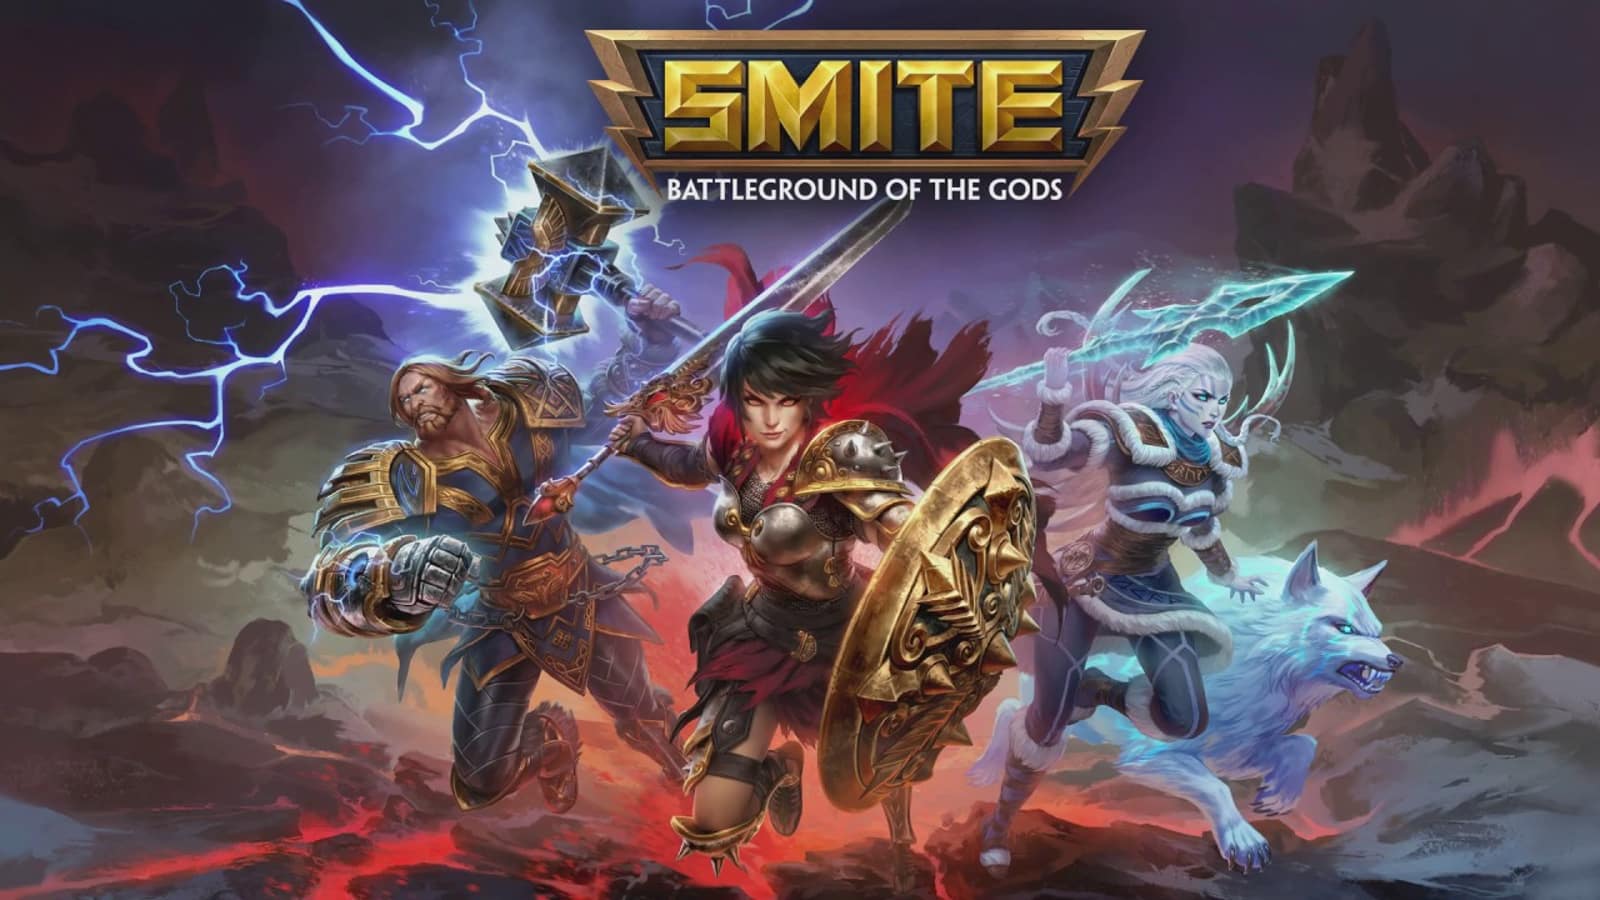 Smite's launch screen featuring Bellon, Thor, and Skadi.